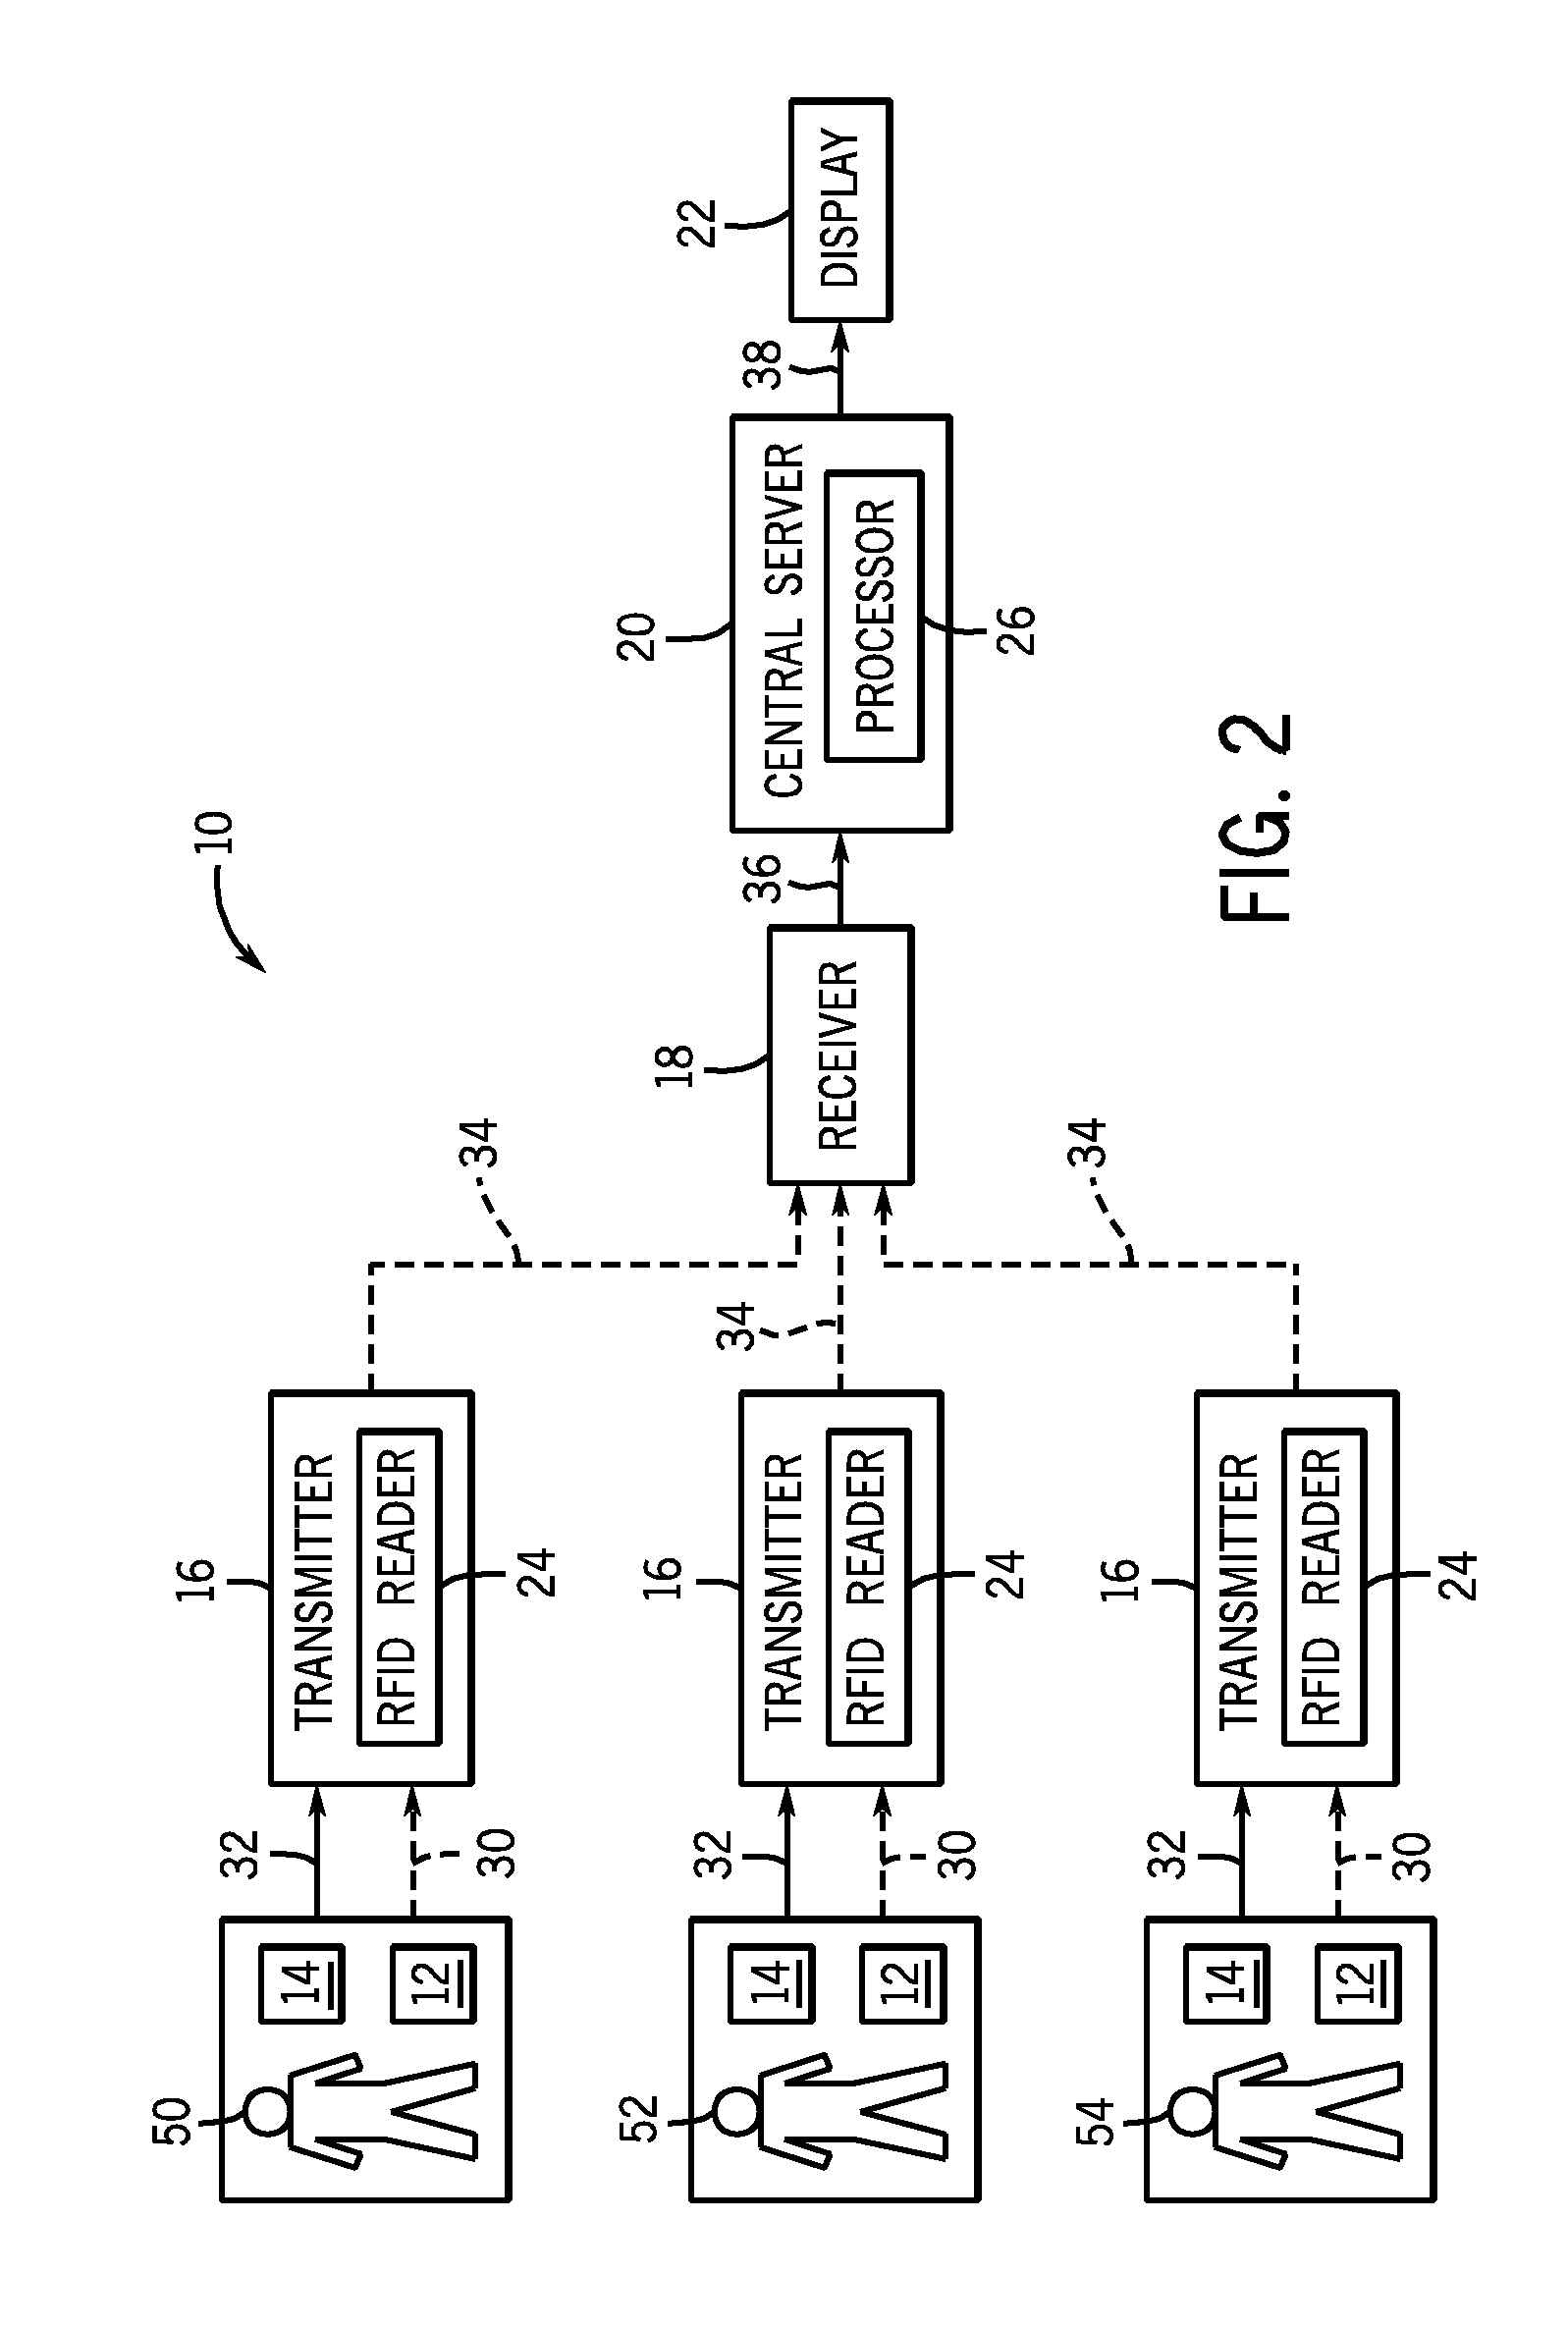 Telemetry system and method